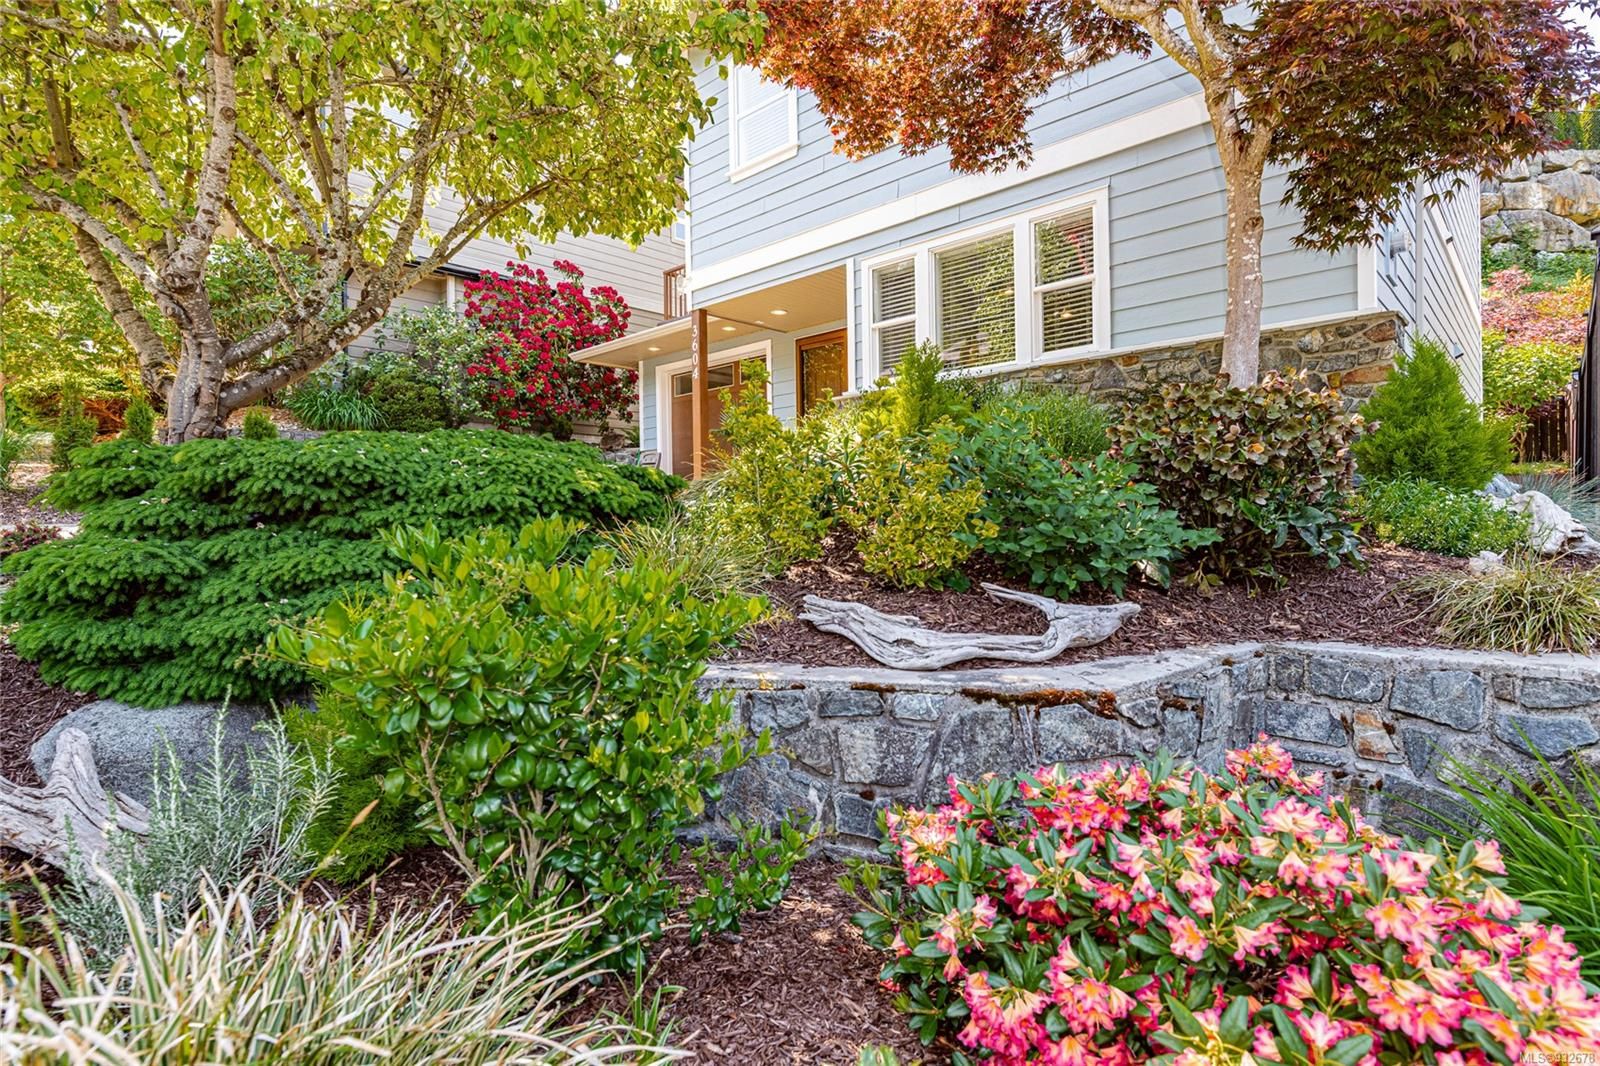 Beautifully Landscaped with great curb appeal!